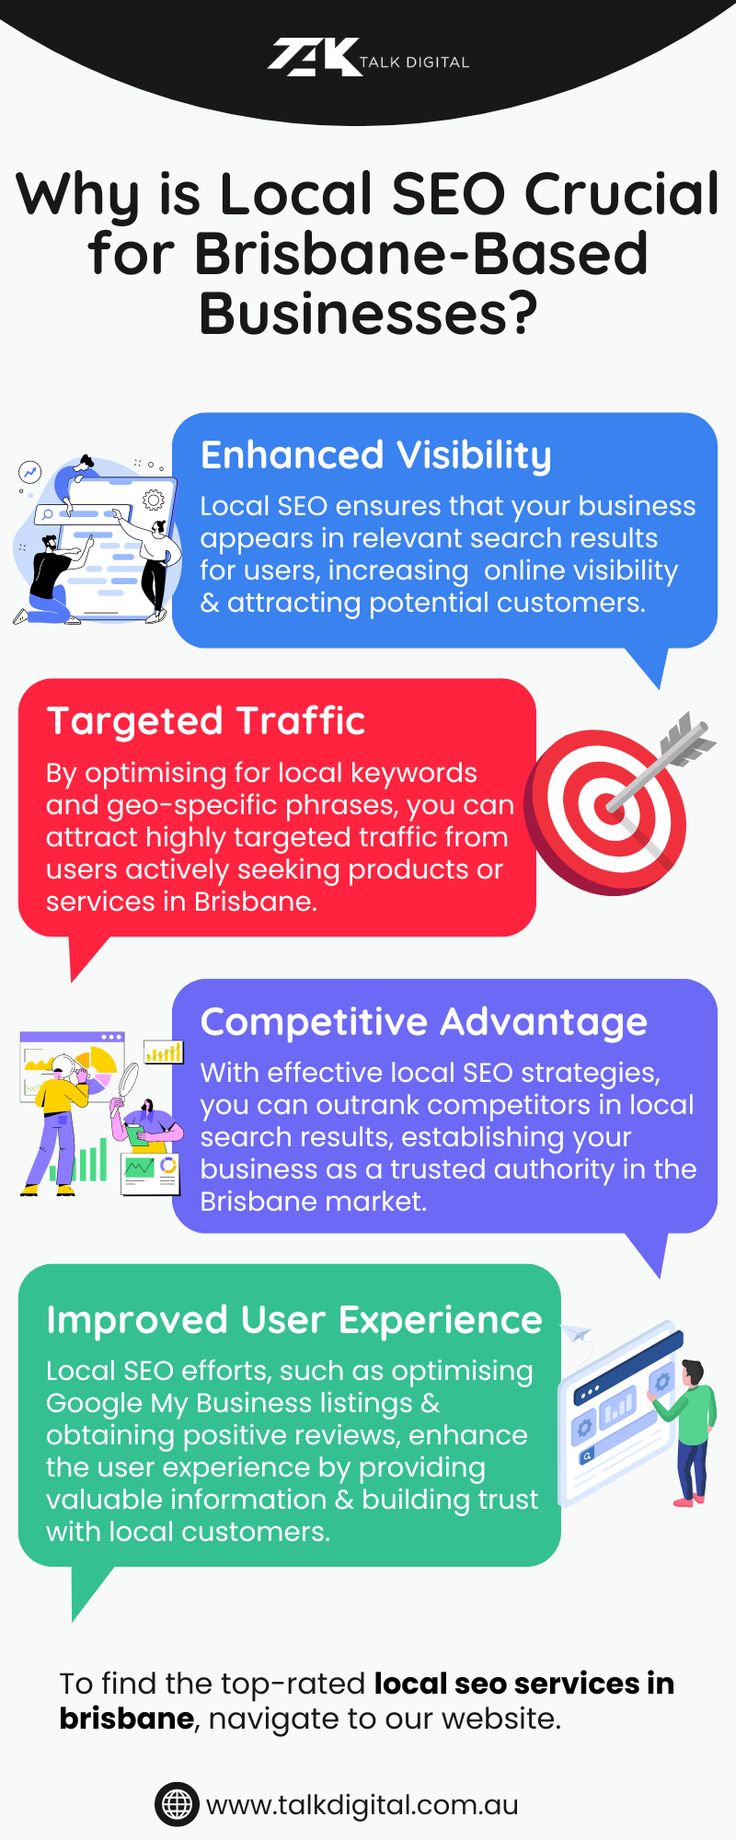 Why is Local SEO Crucial for Brisbane-Based Businesses?